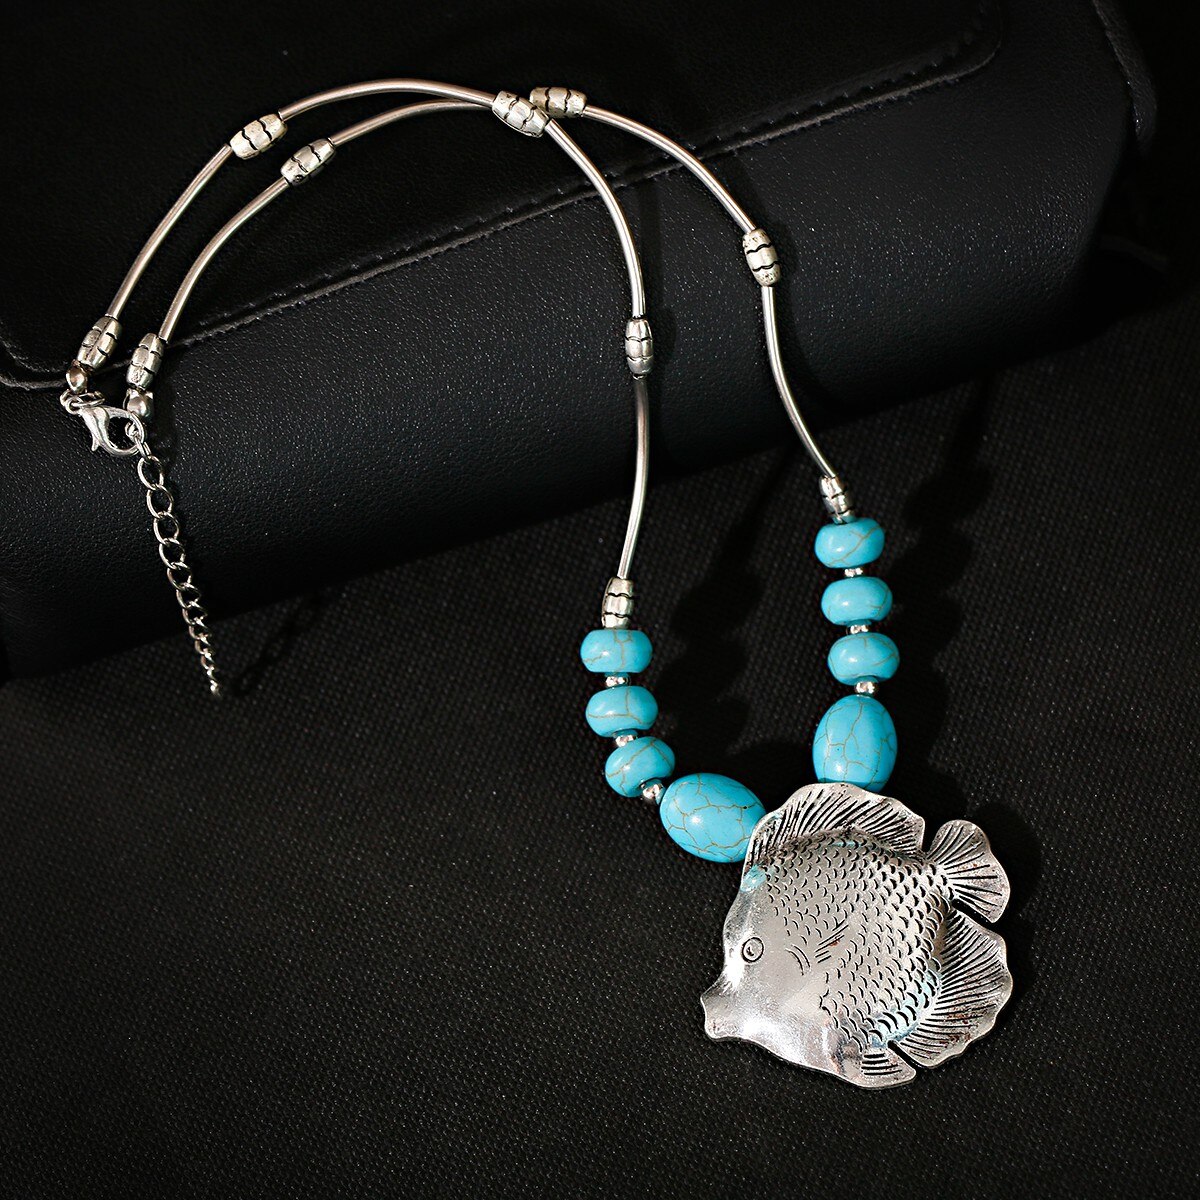 2022-Ethnic-Gypsy-Boho-Necklace-For-Women-Jewelry-Silver-Color-Fish-Shape-Turquoises-Indian-Necklace-1005004708775510-2